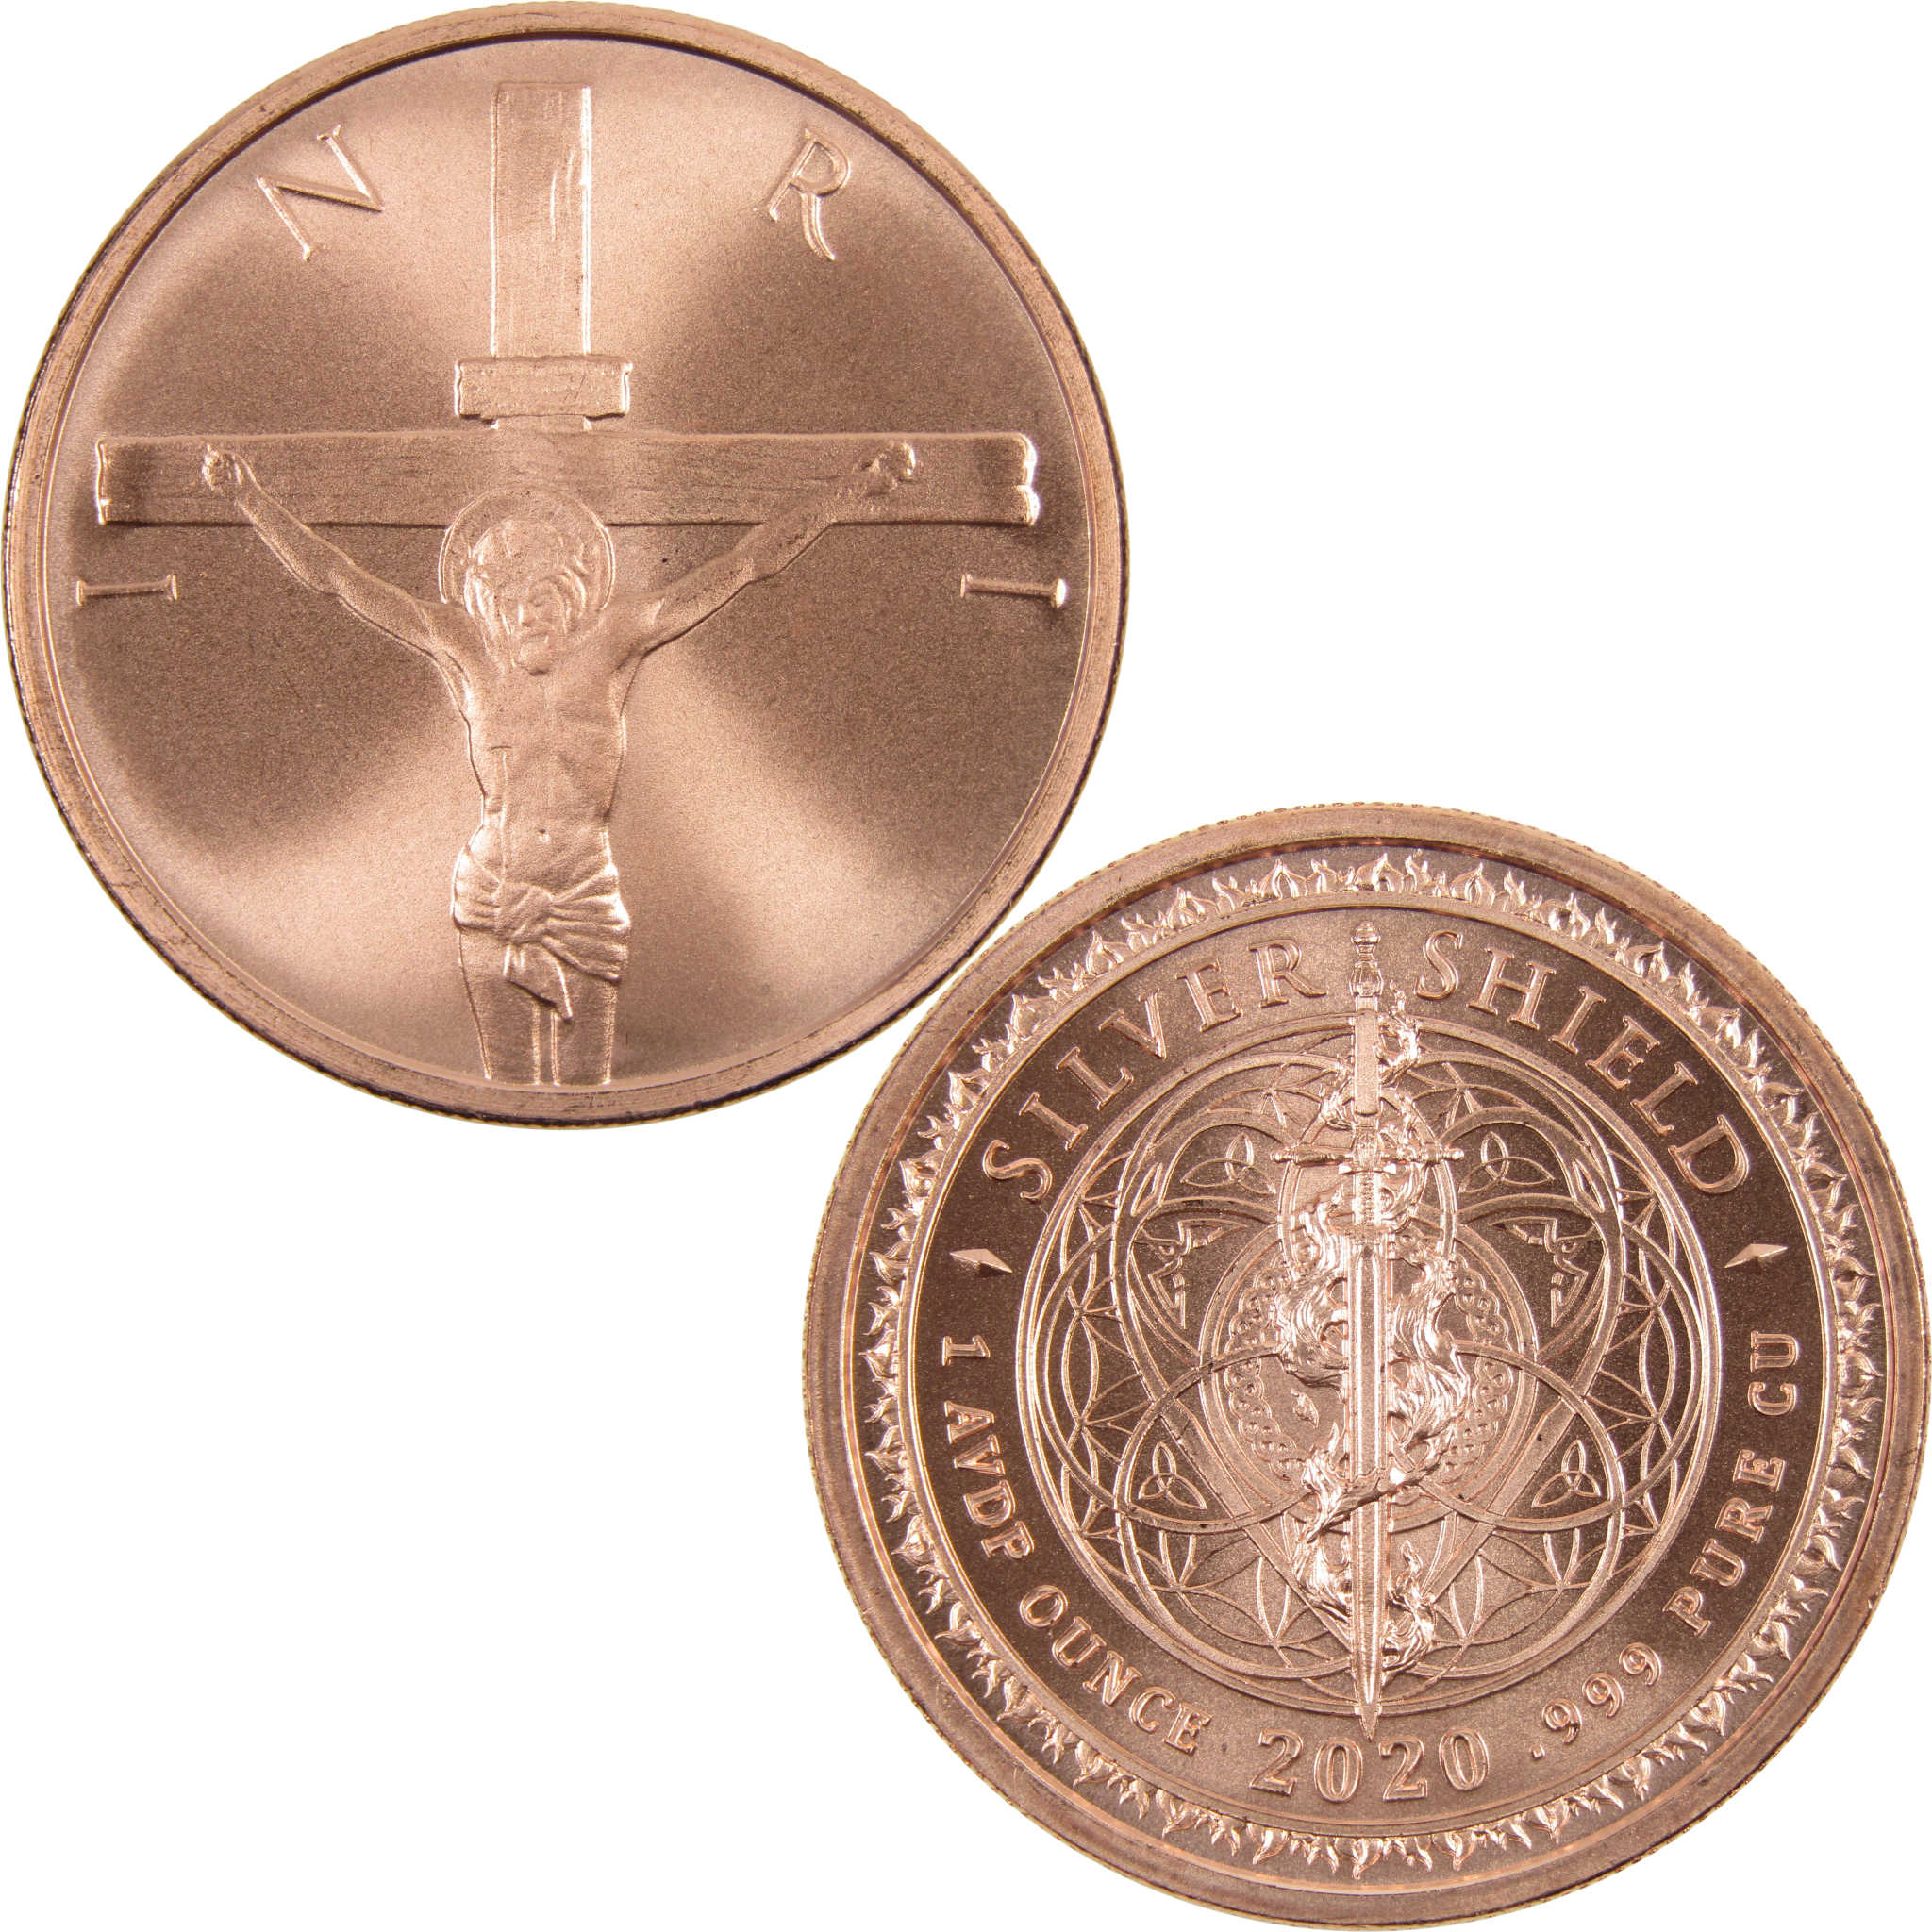 Crucifixion of Christ 1 oz .999 Copper Round Holiday Collectible 2020